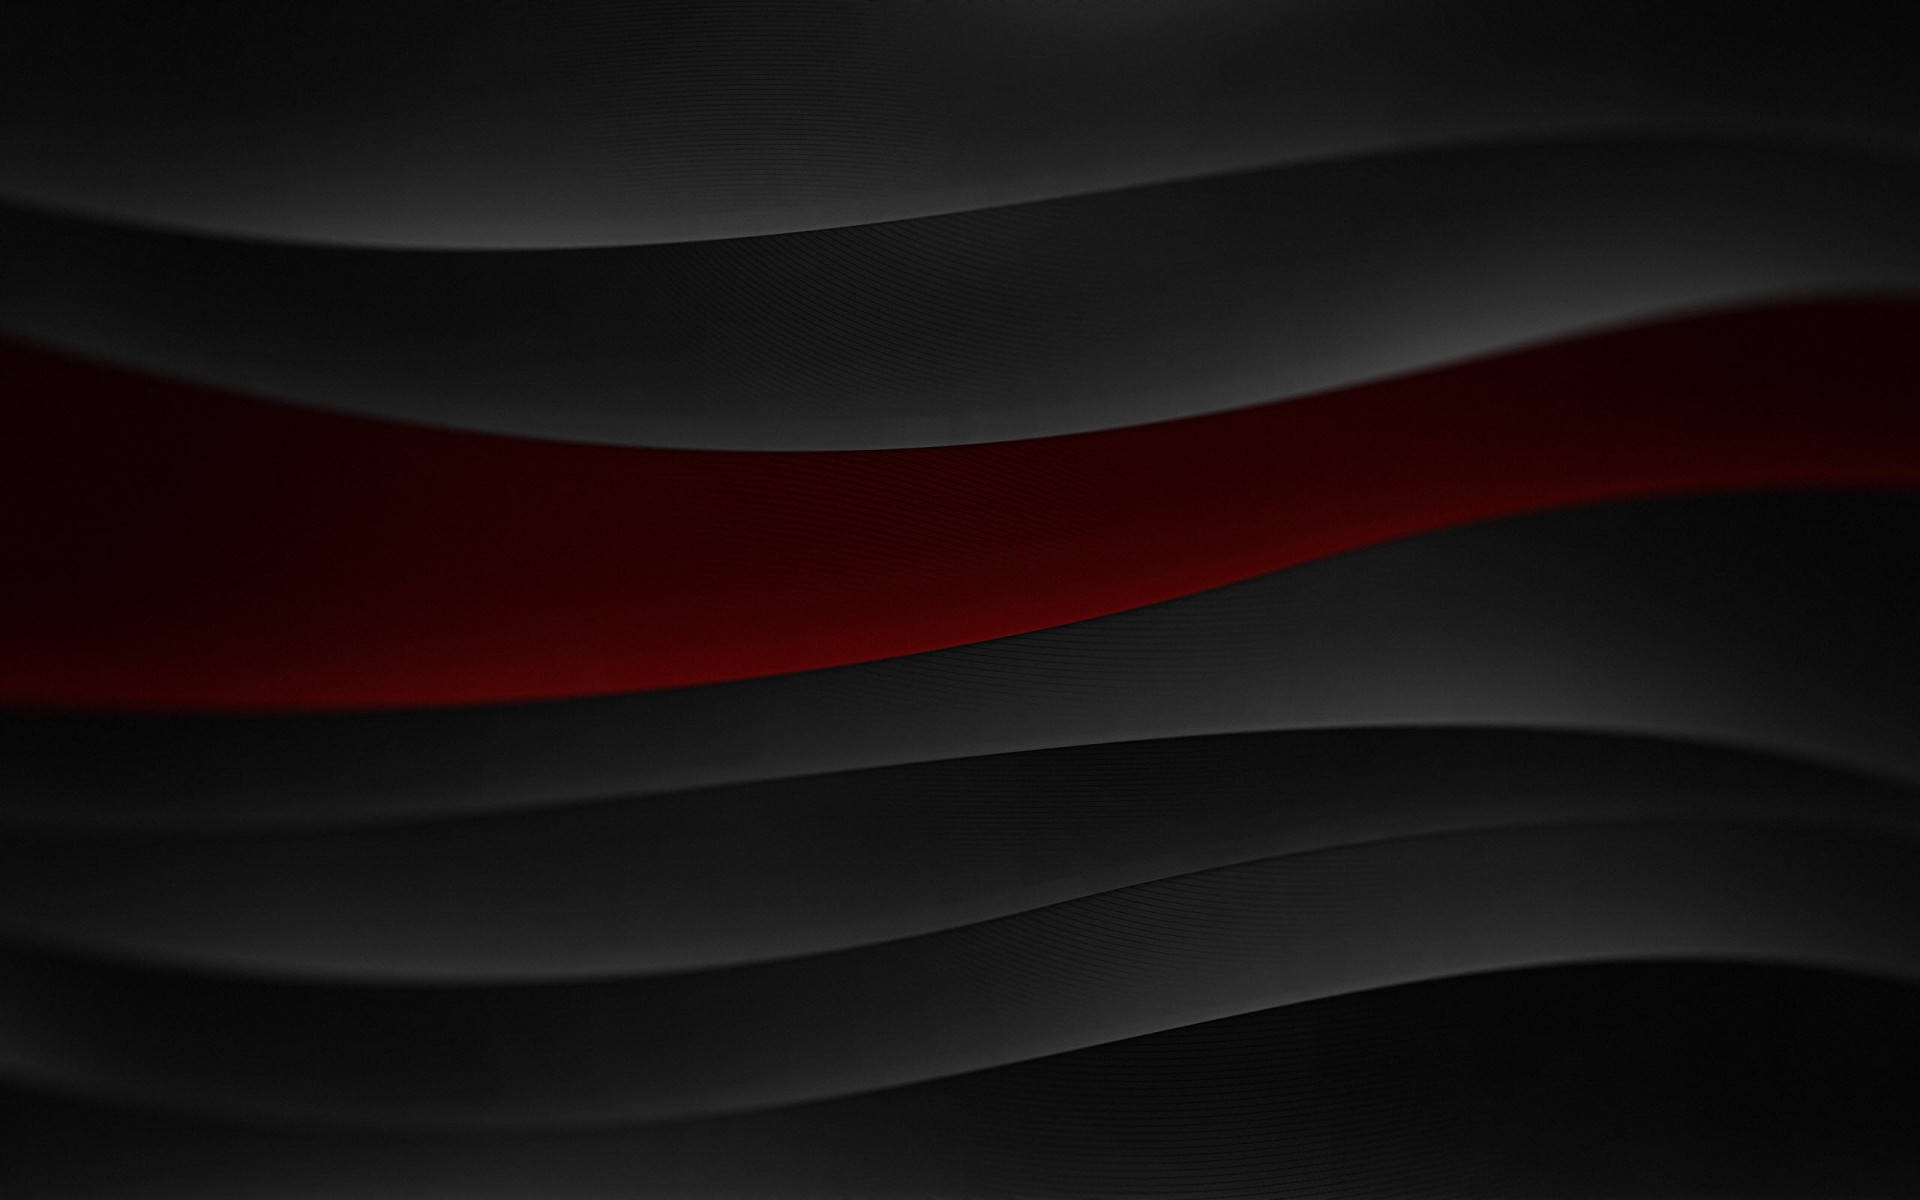 A Black And Red Abstract Wallpaper With Wavy Lines